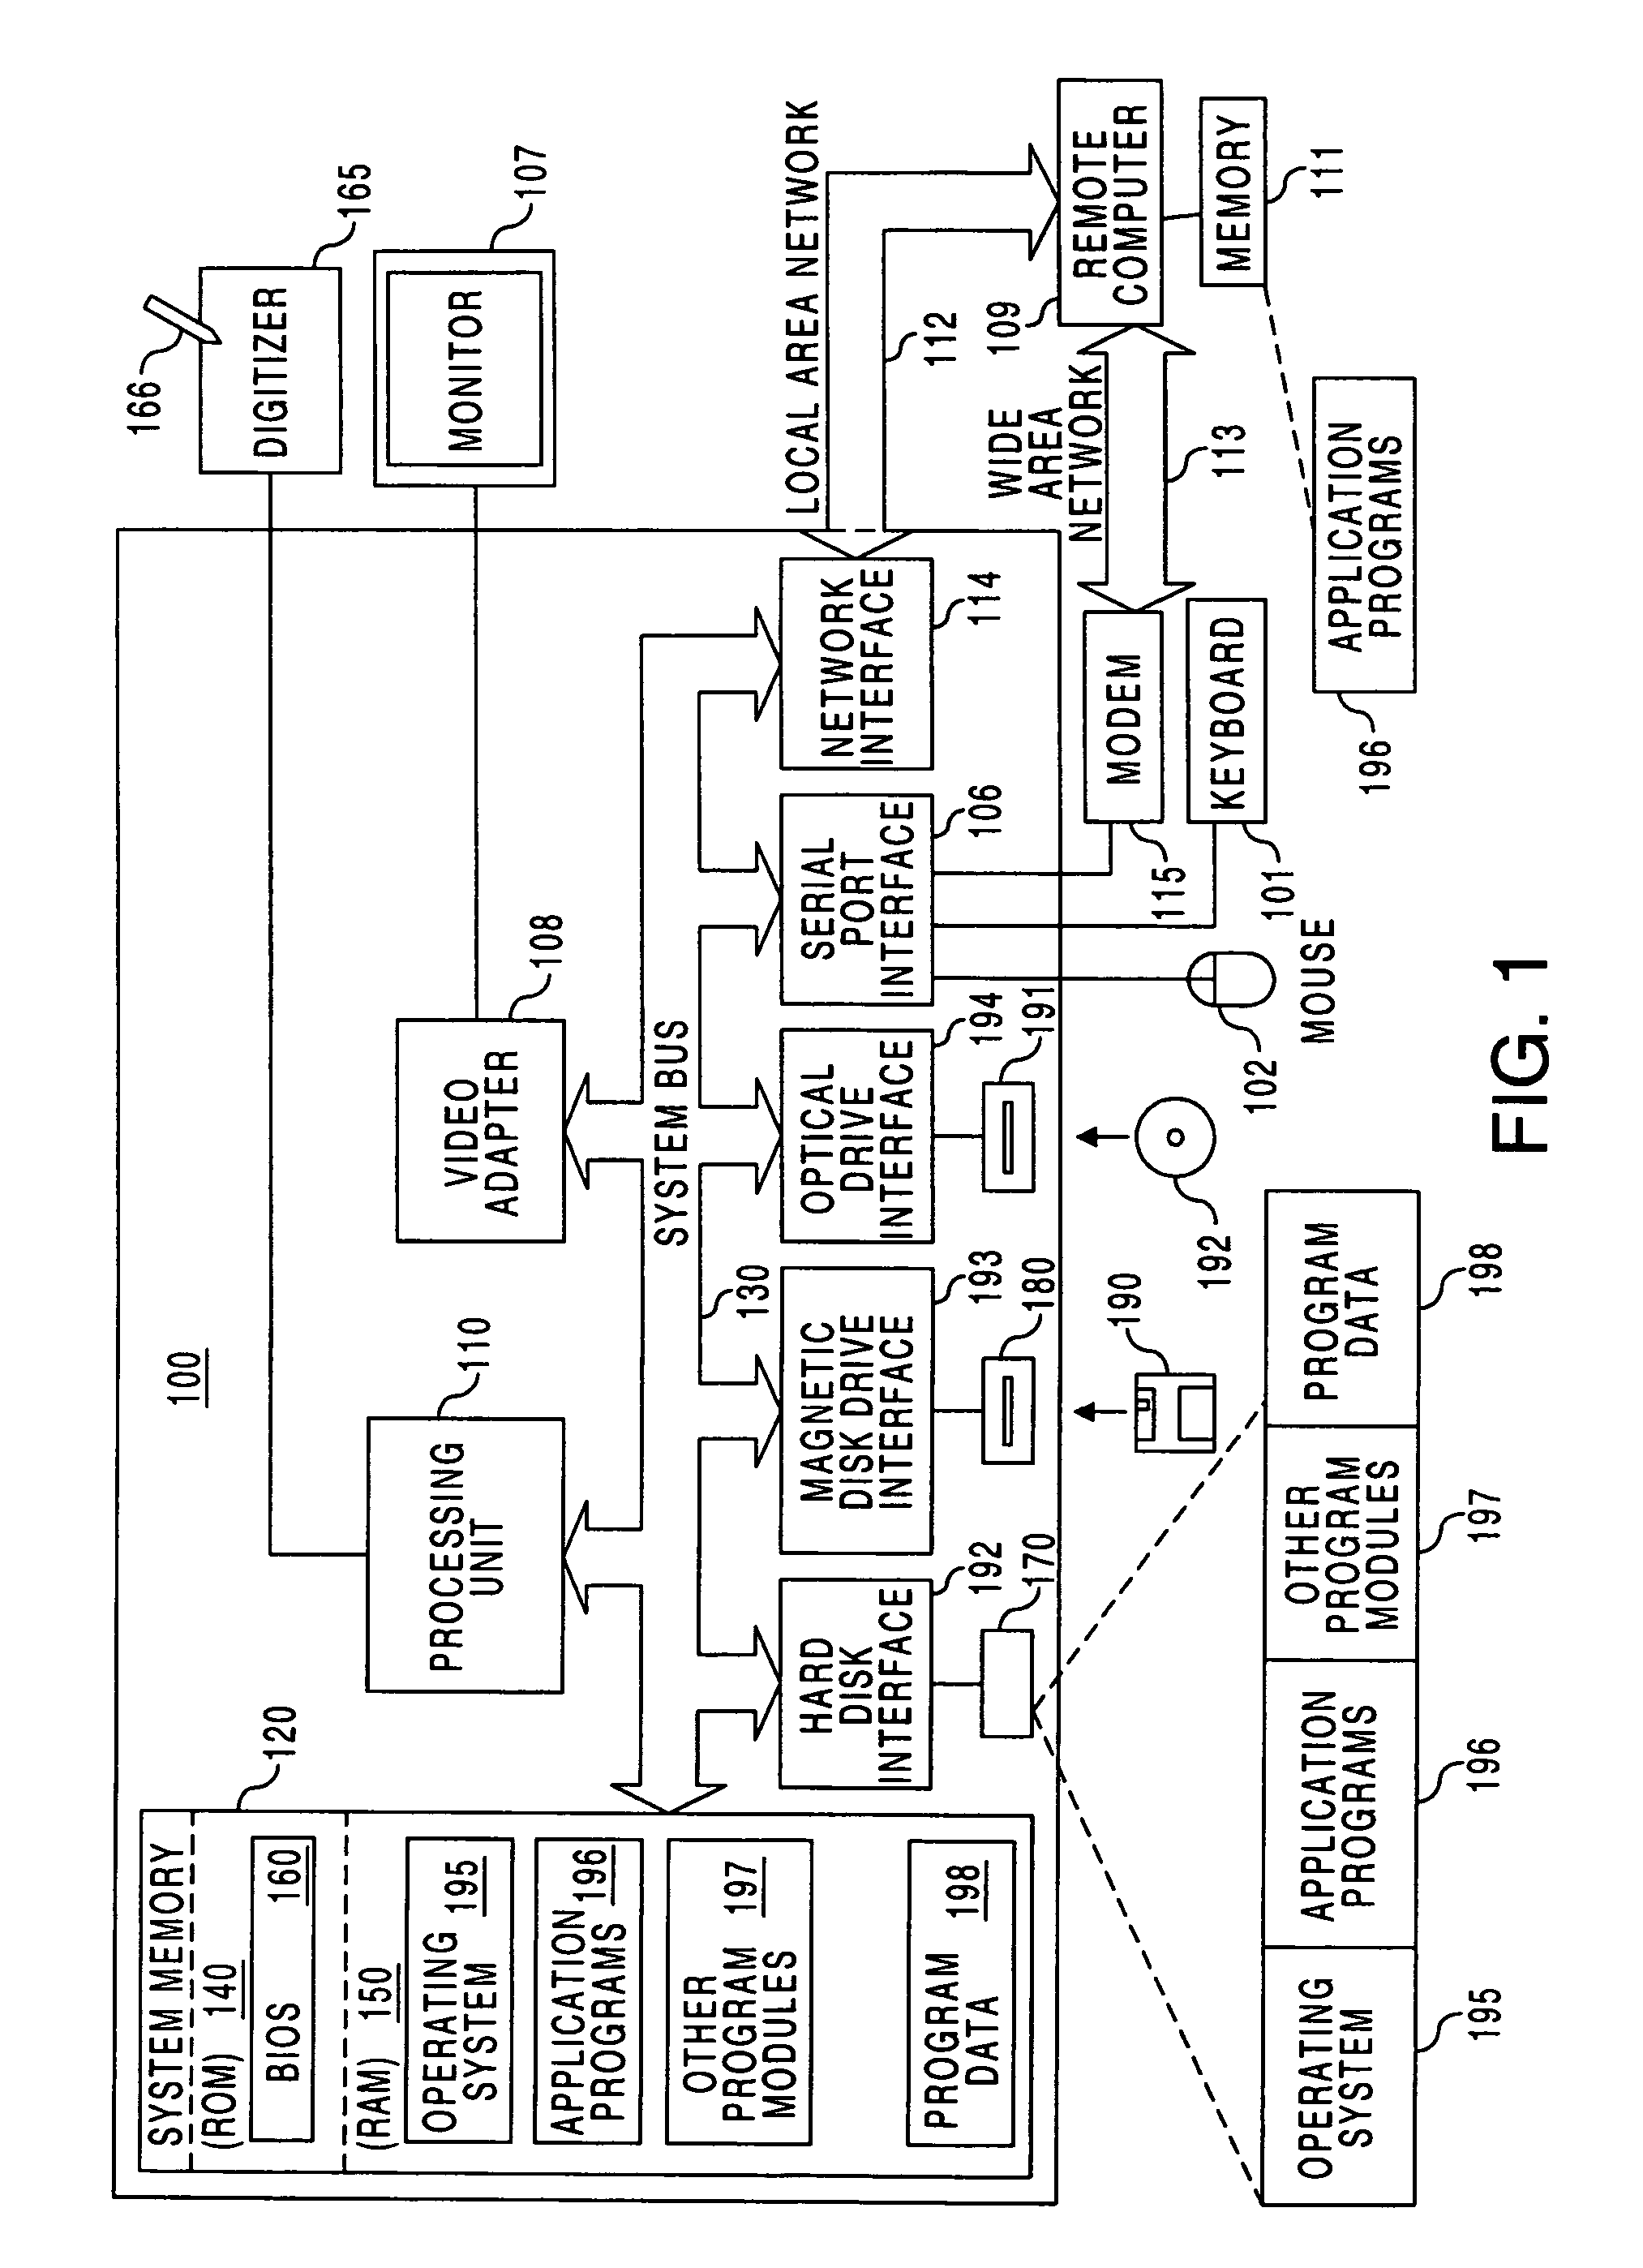 Correction of alignment and linearity errors in a stylus input system